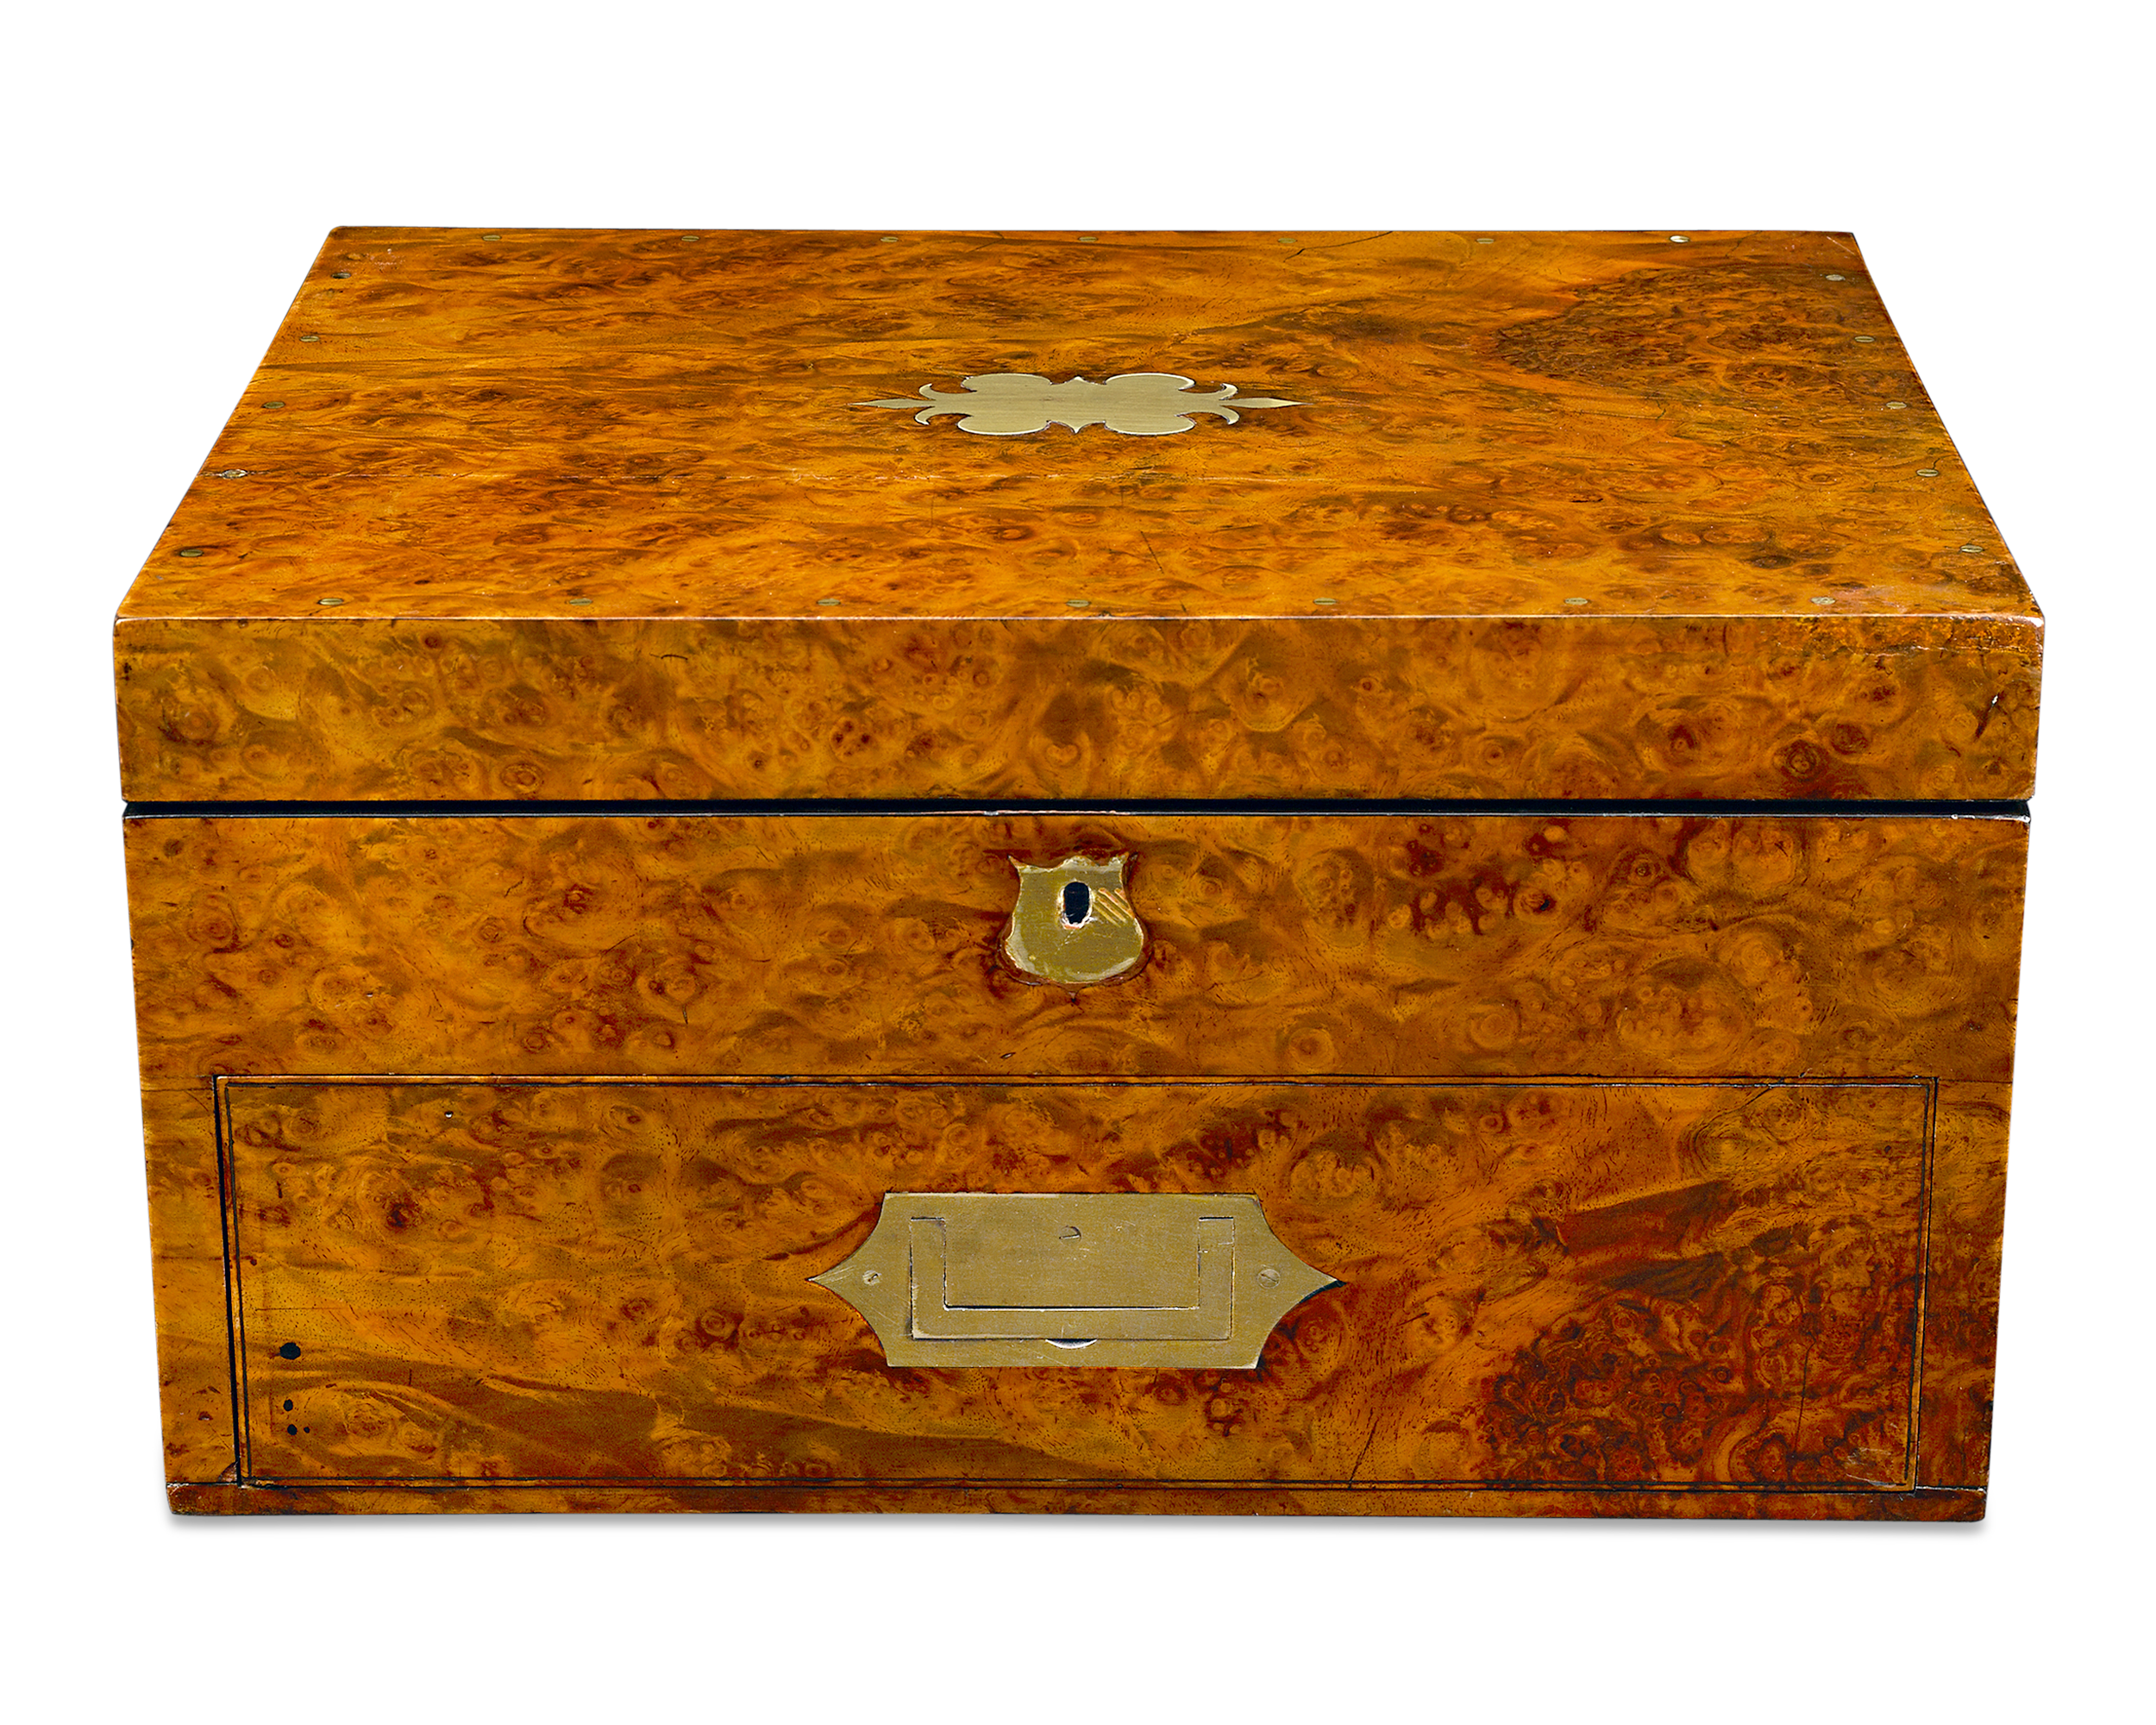 The case is crafted of burl walnut with flushed brass fittings